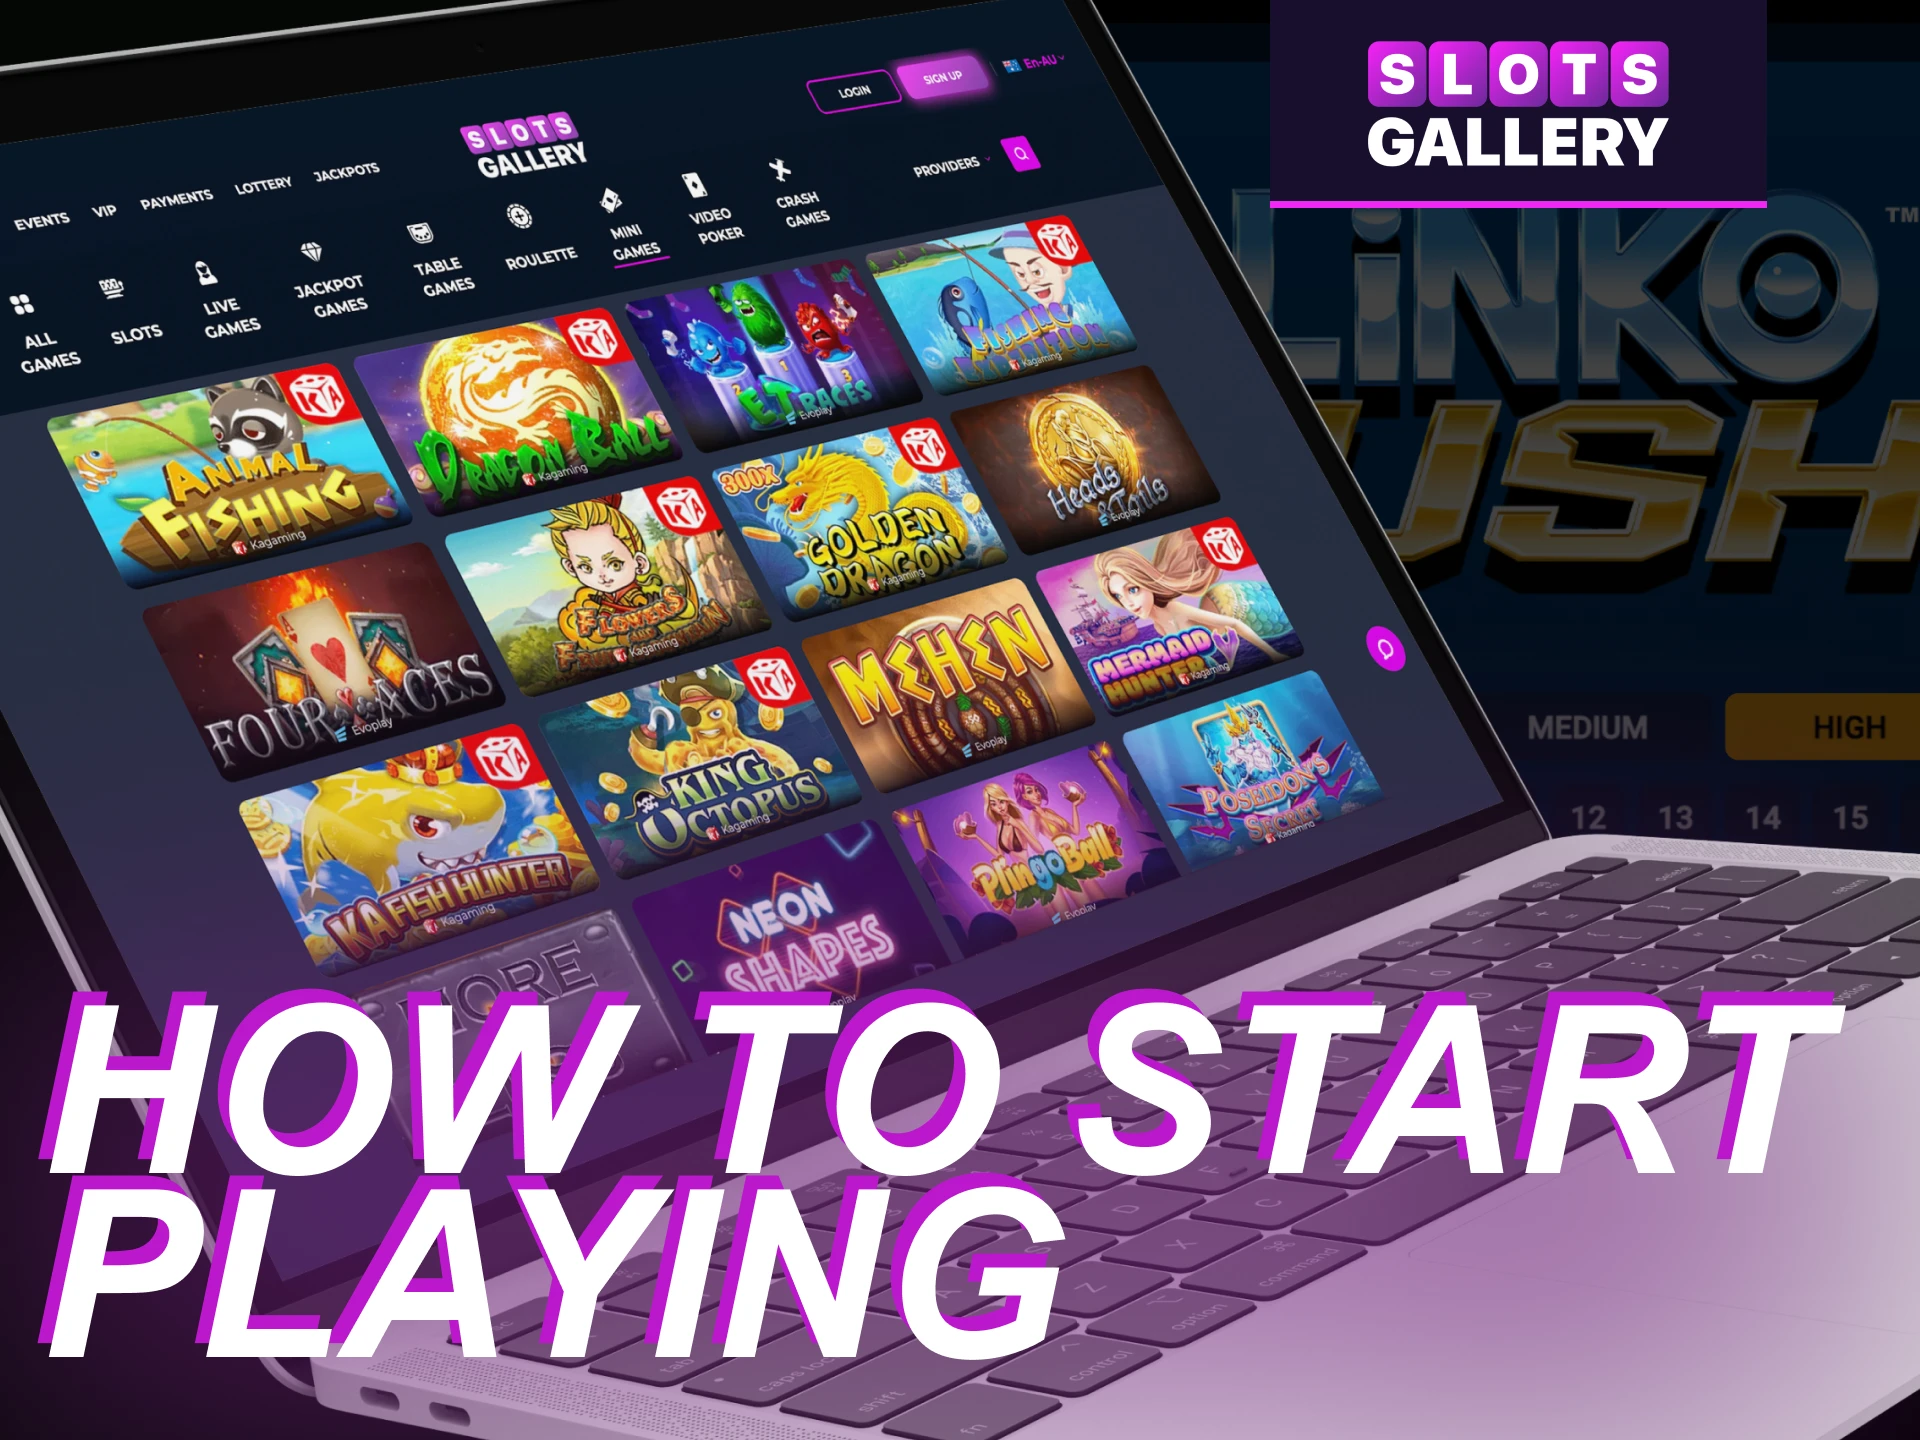 Instructions for users on how to start playing mini games in the Slots Gallery online casino.